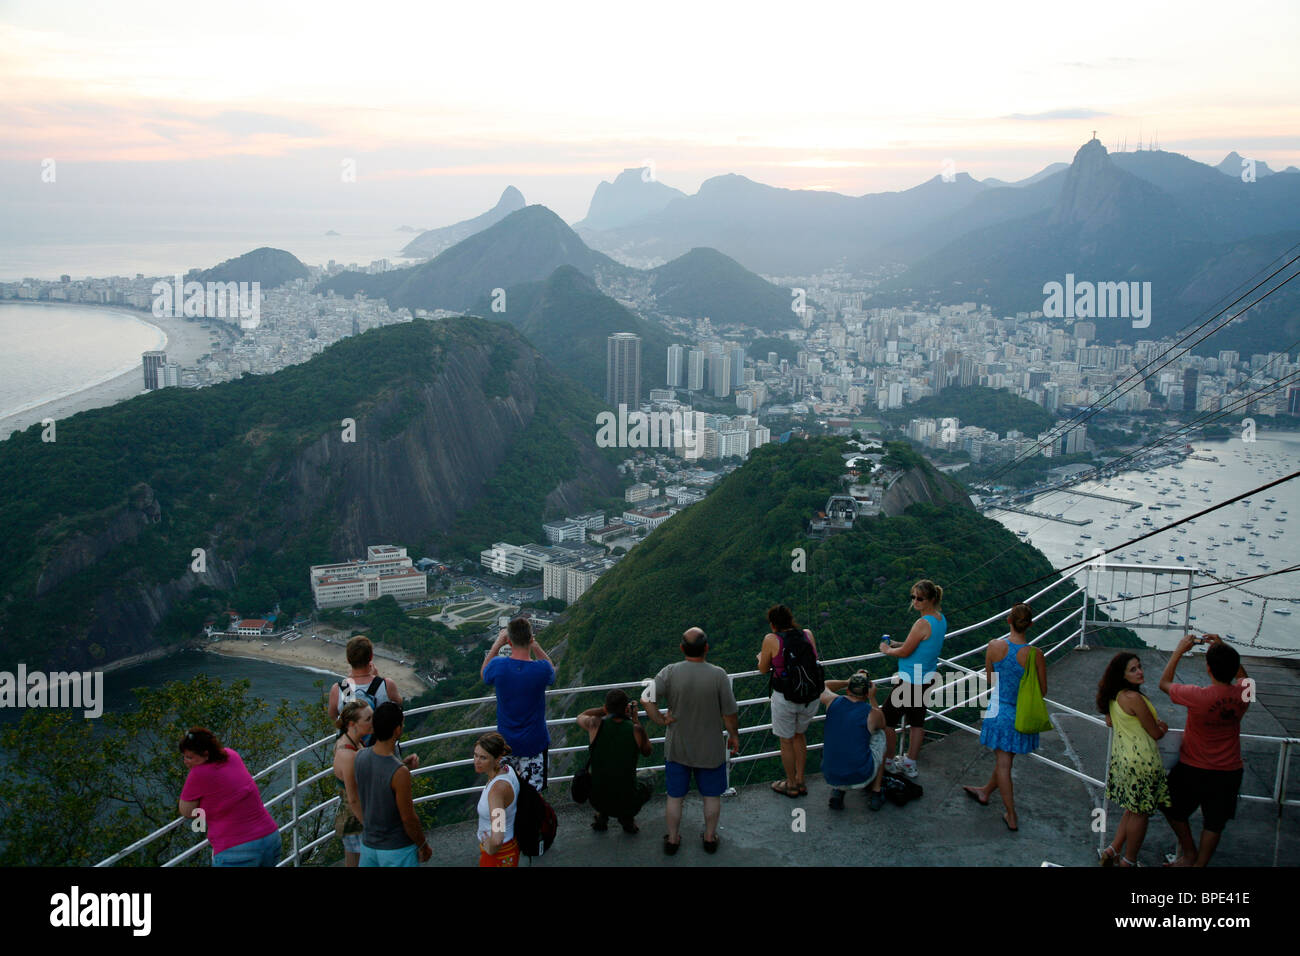 People on top of the Pao Asucar or Sugar loaf mountain with a view over the city, Rio de Janeiro, Brazil. Stock Photo